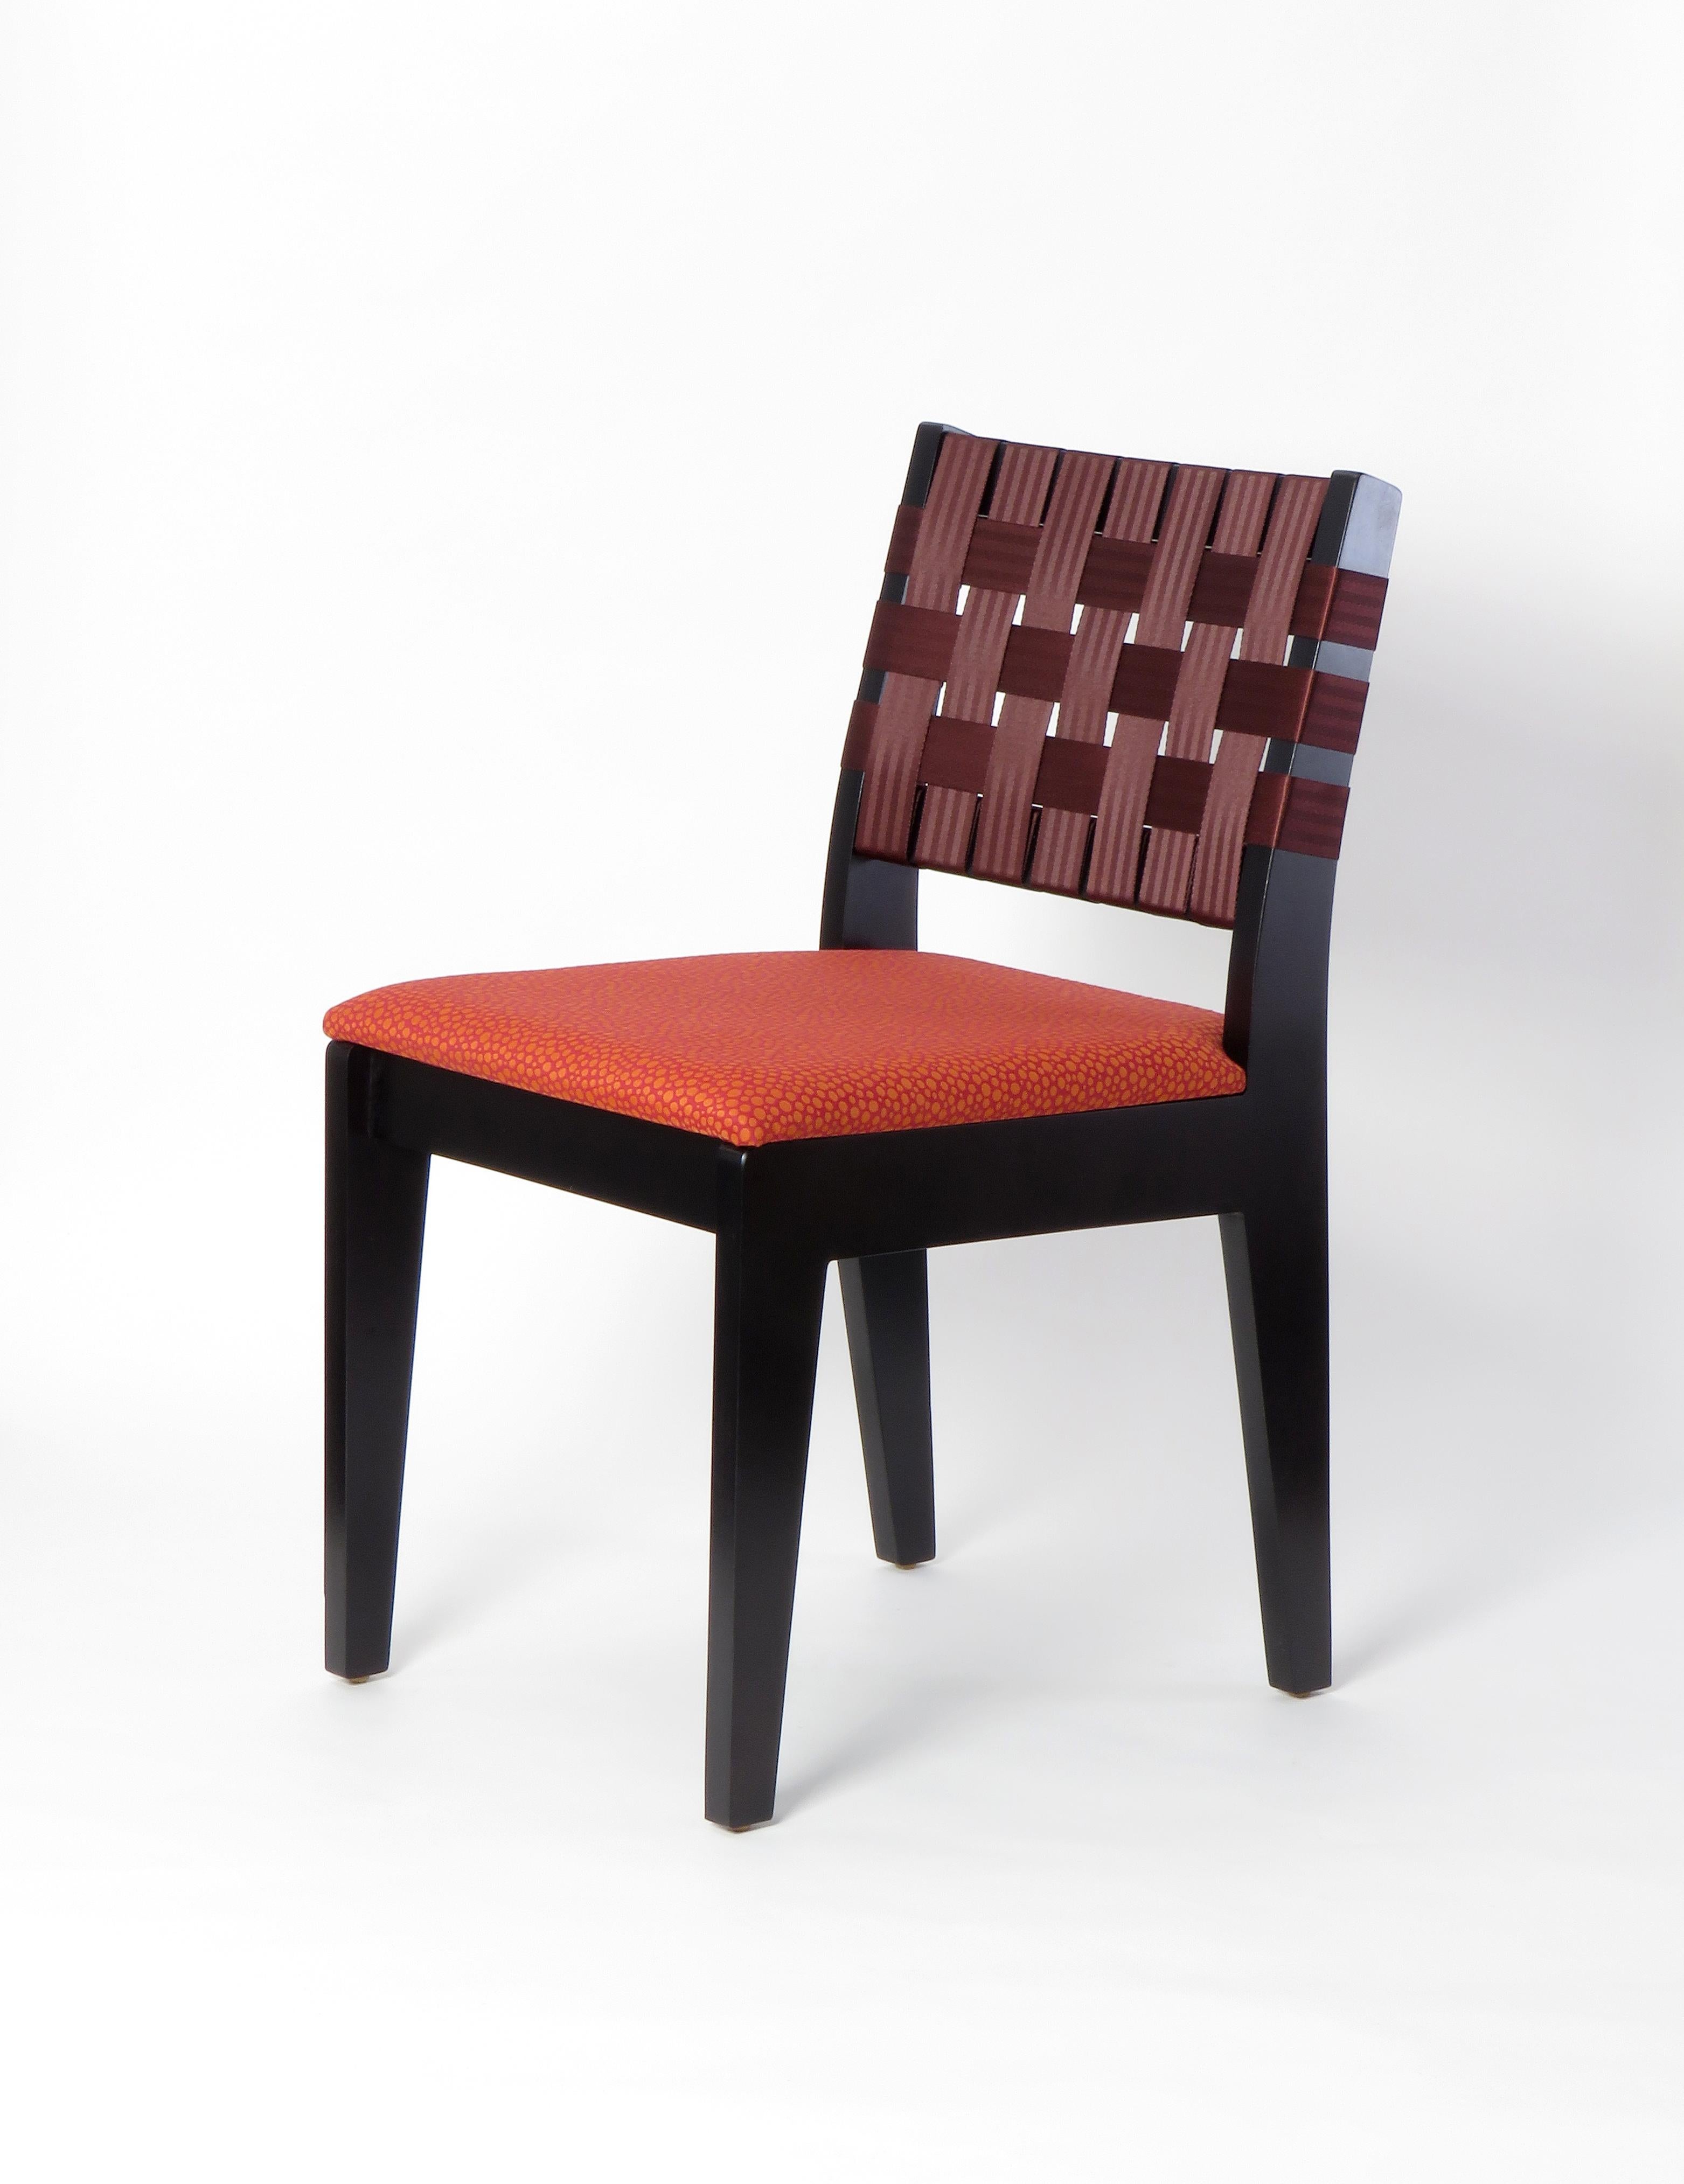 Maple Side Chair in Black Finish with Red Woven Seat and Back by Peter Danko For Sale 6